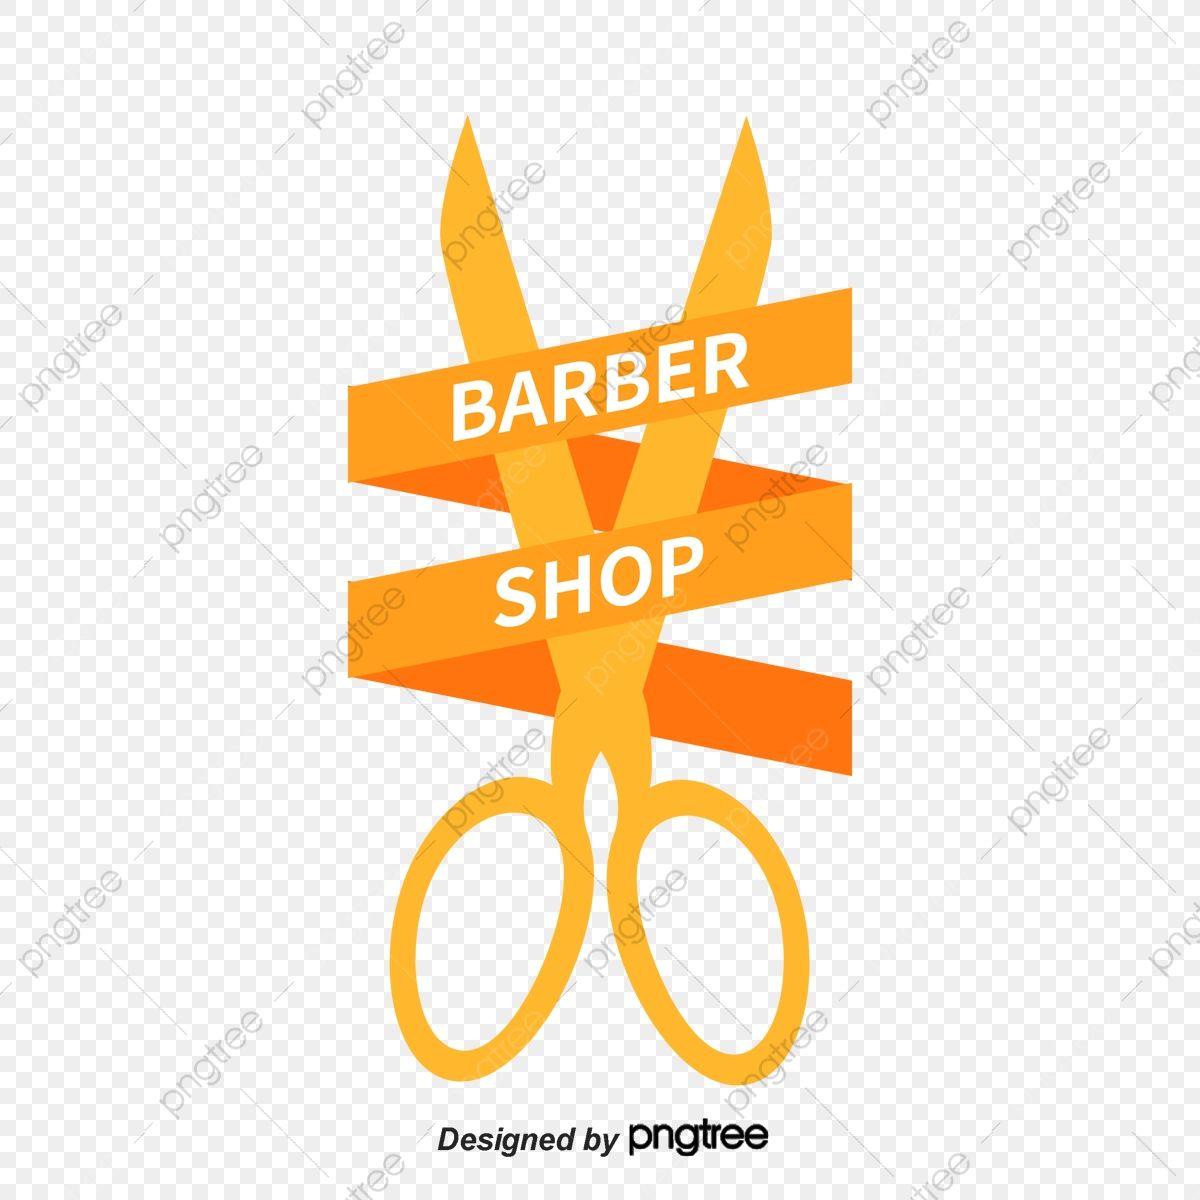 Scissors Logo - Vector Scissors Logo, Scissors Vector, Logo Vector, Blue PNG and ...